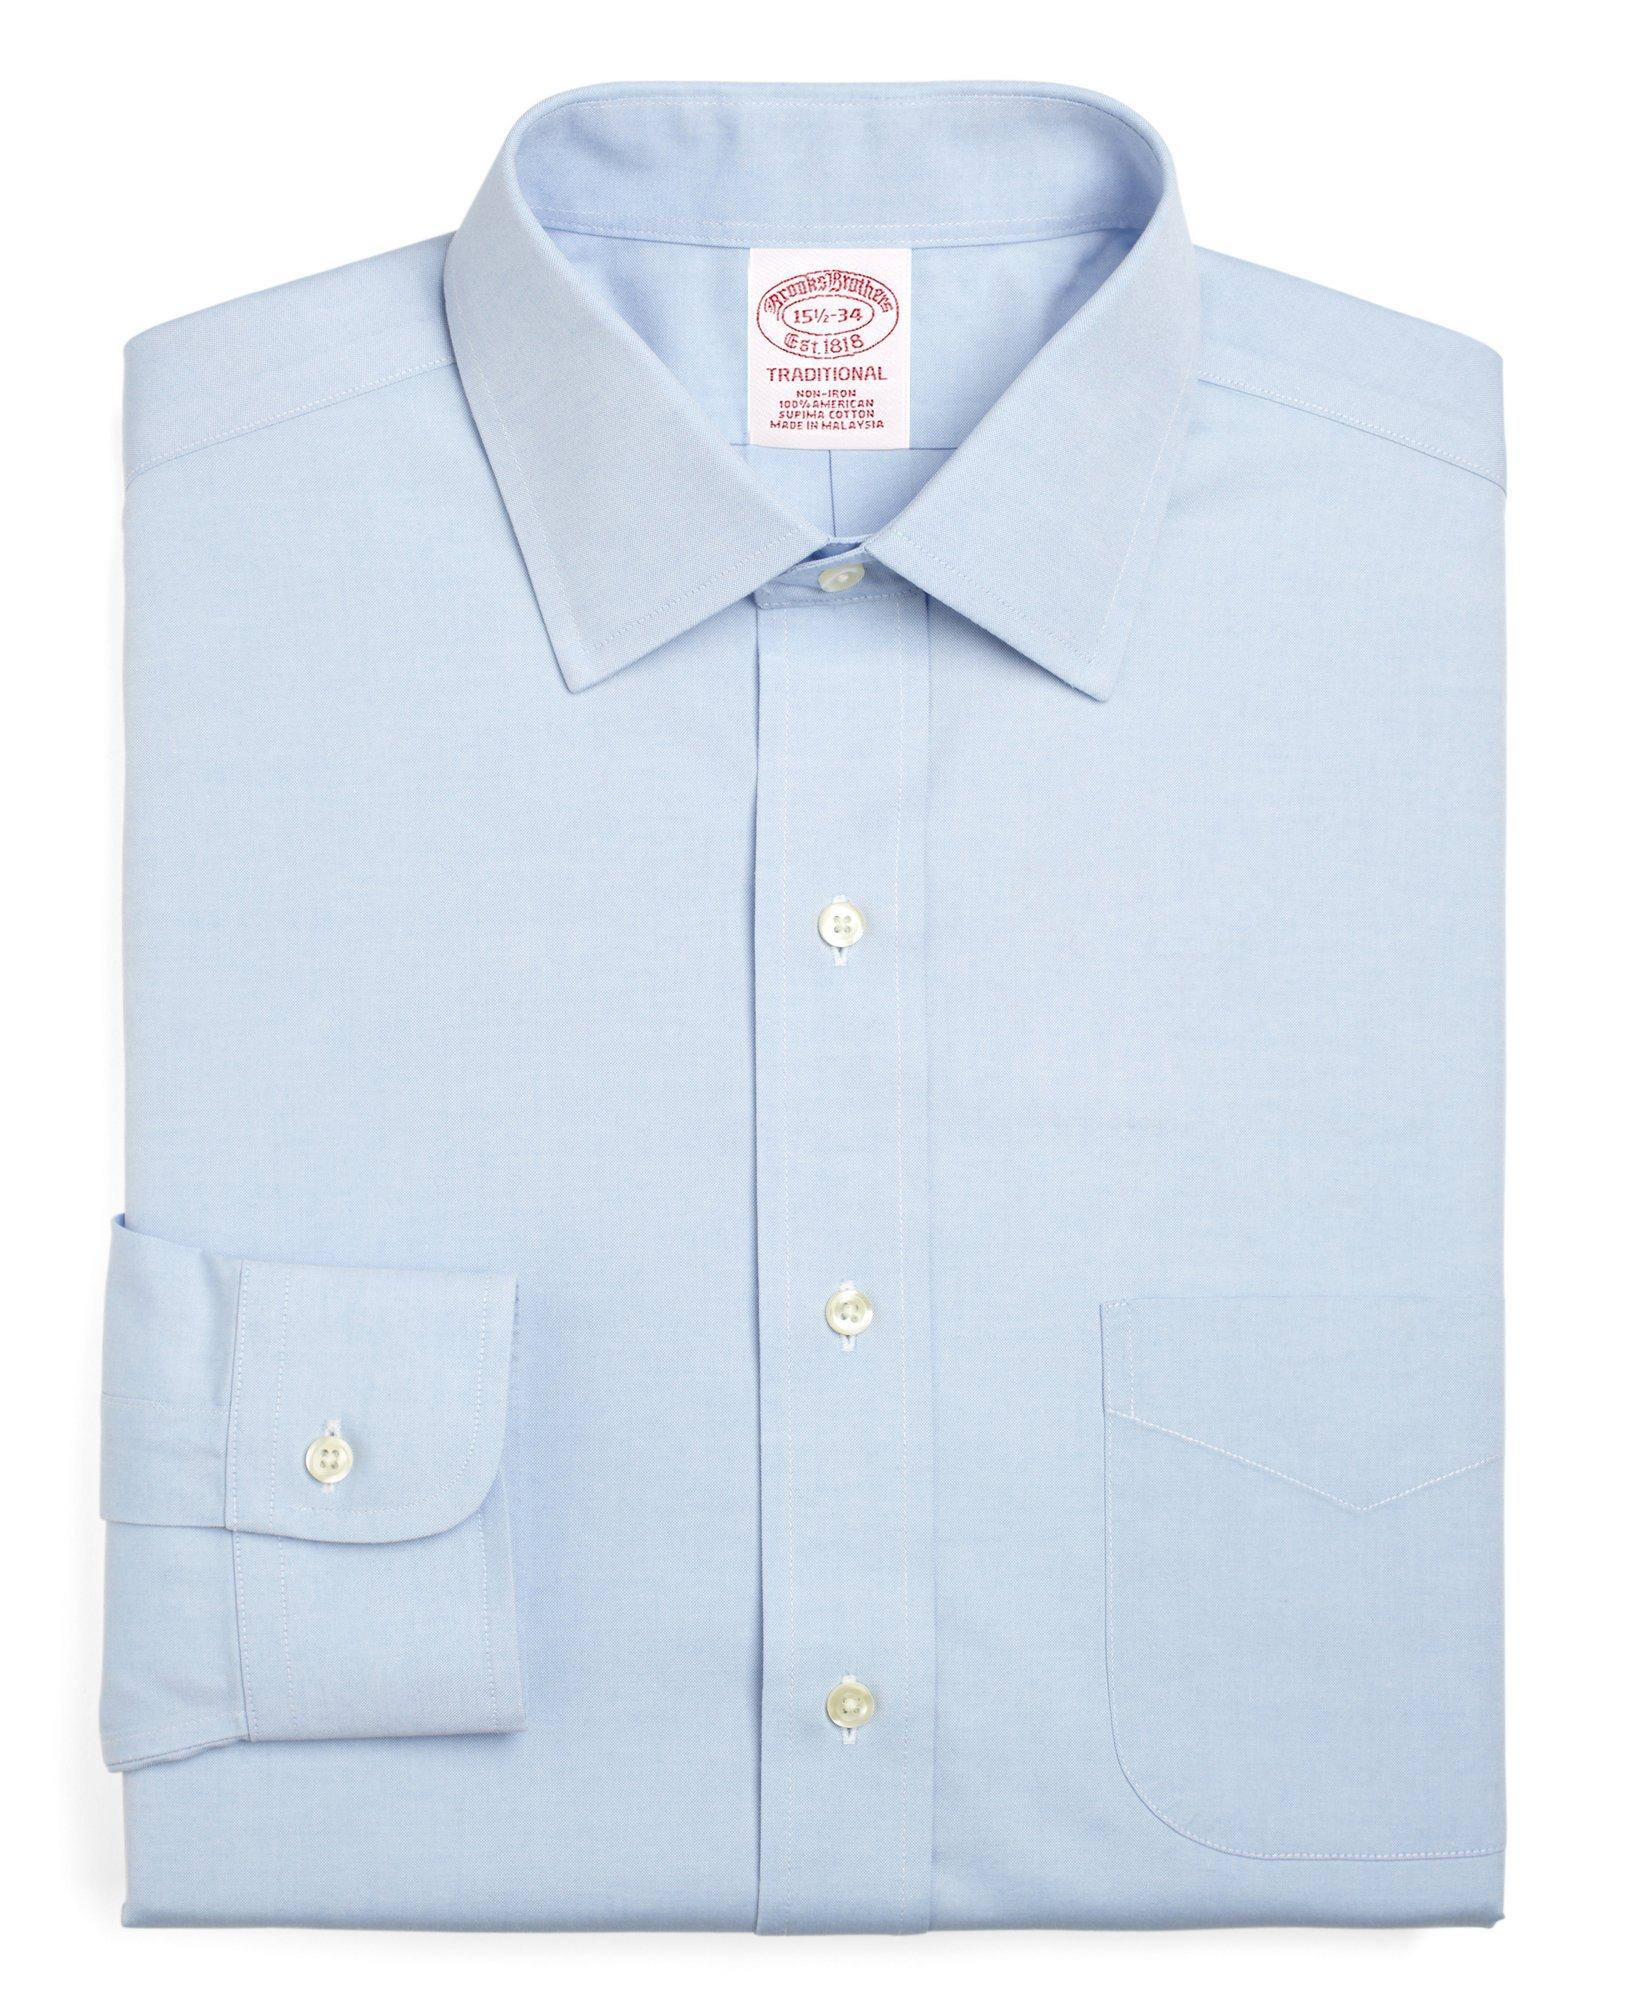 Men's Non-Iron Traditional Fit Spread Collar Dress Shirt | Brooks Brothers